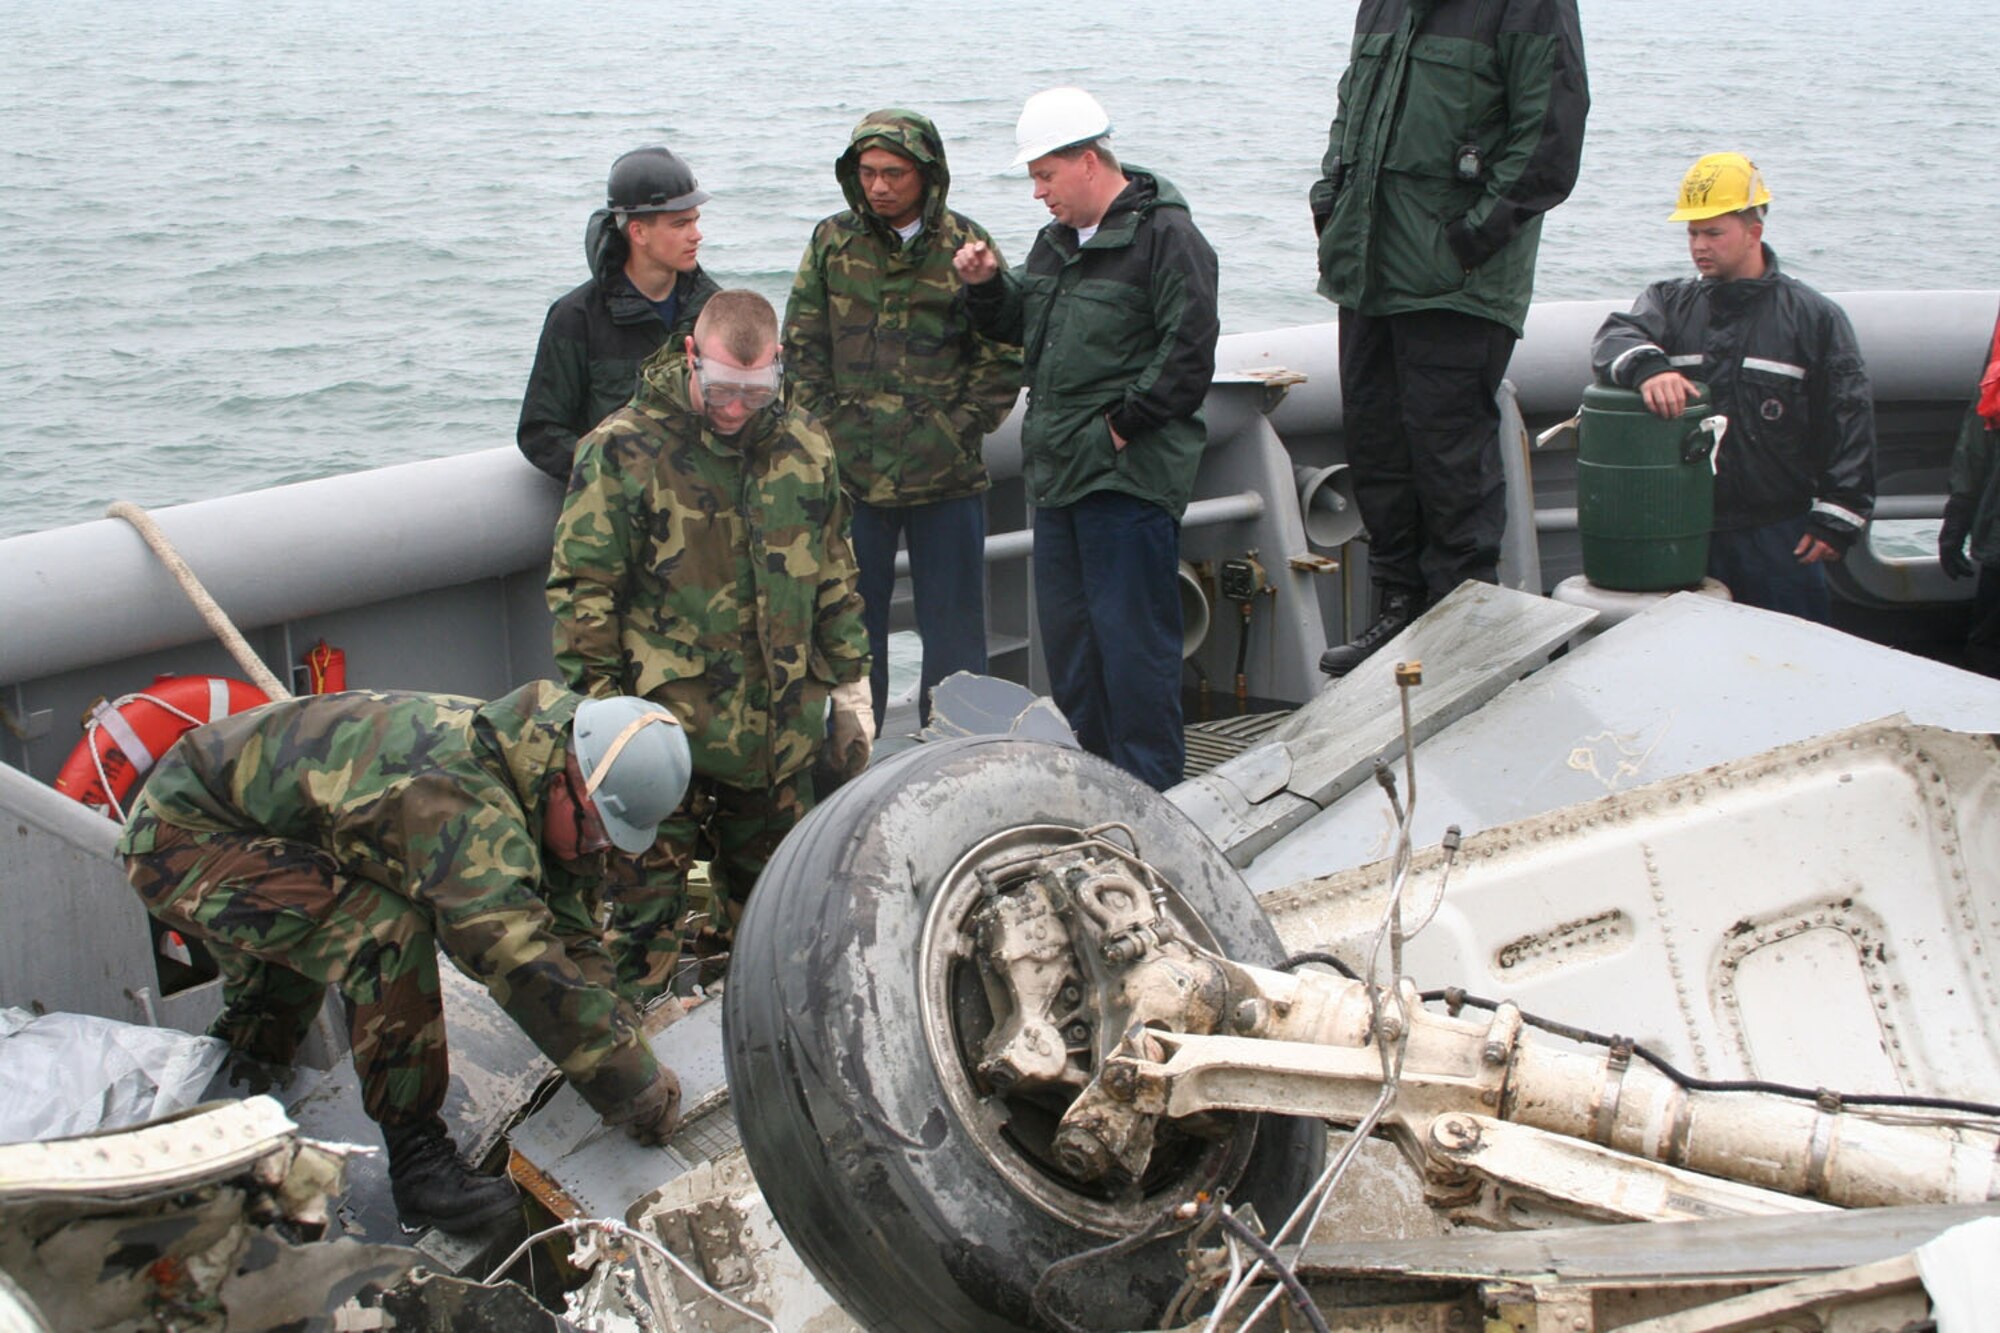 IN THE WEST SEA, Republic of Korea ? Staff Sgt. Ryan Aday (far left), crash recovery, searches for a flight data recorder among F-16 wreckage salvaged by Navy divers. The wreckage from the March 14 crash was recovered by the U.S.S. Safeguard May 10 and will assist in the investigation. (Photo by Staff Sgt. Melissa Allan)